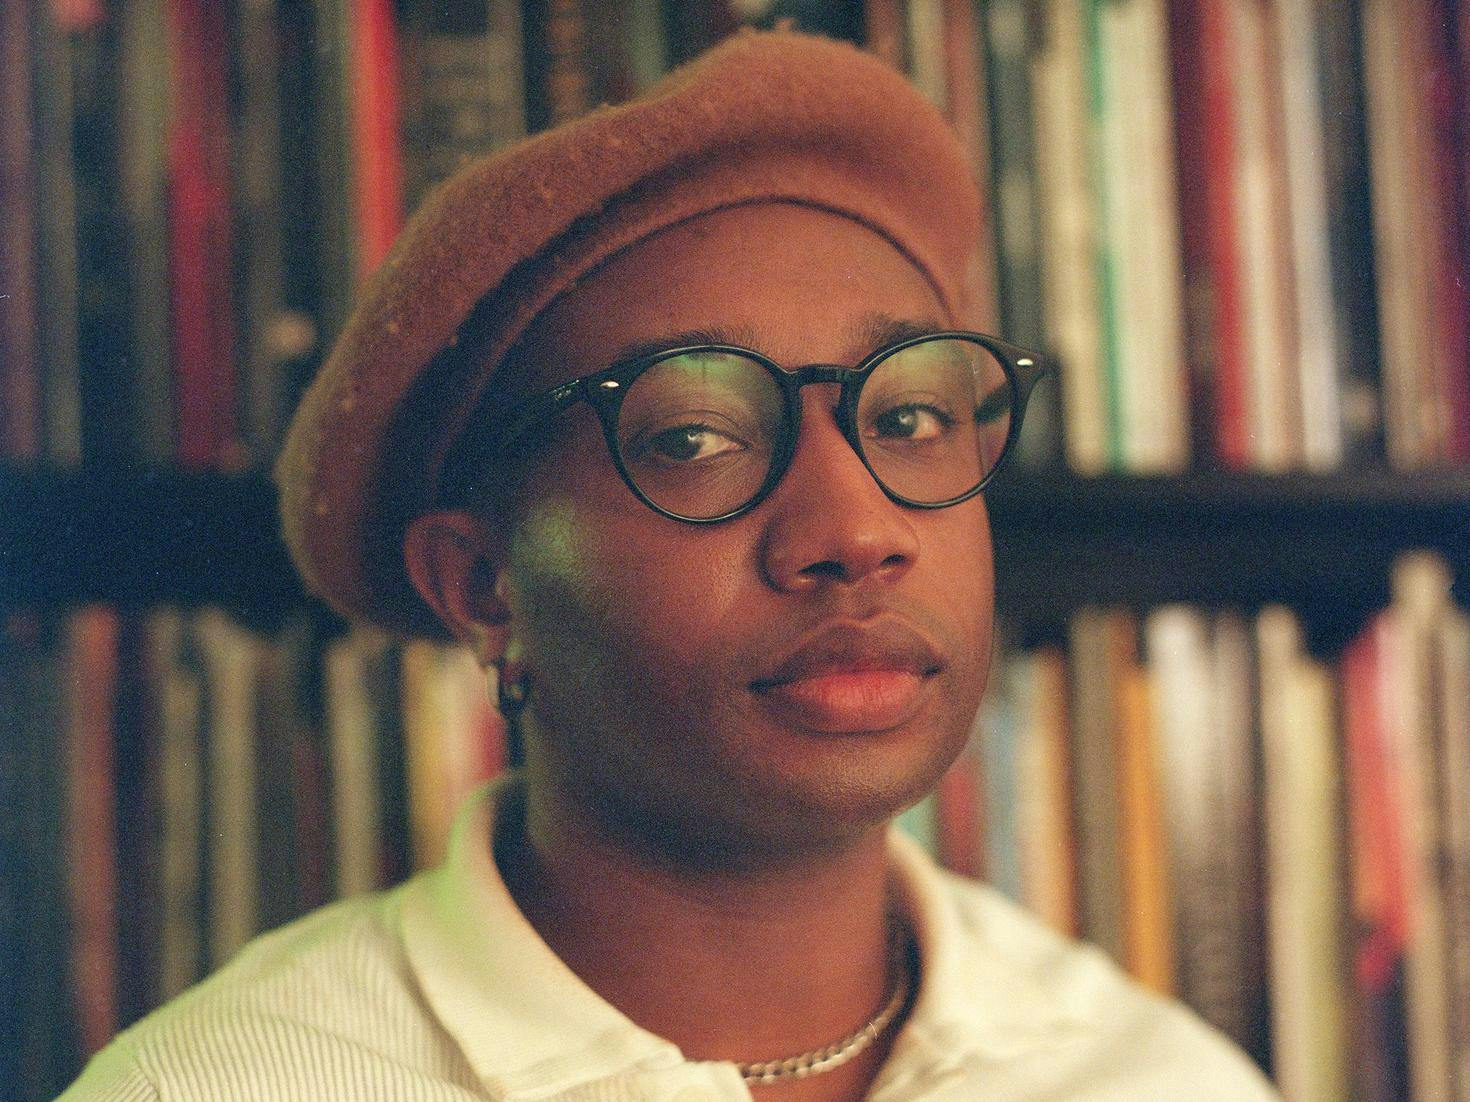 A person in a caramel-colored beret and black glasses